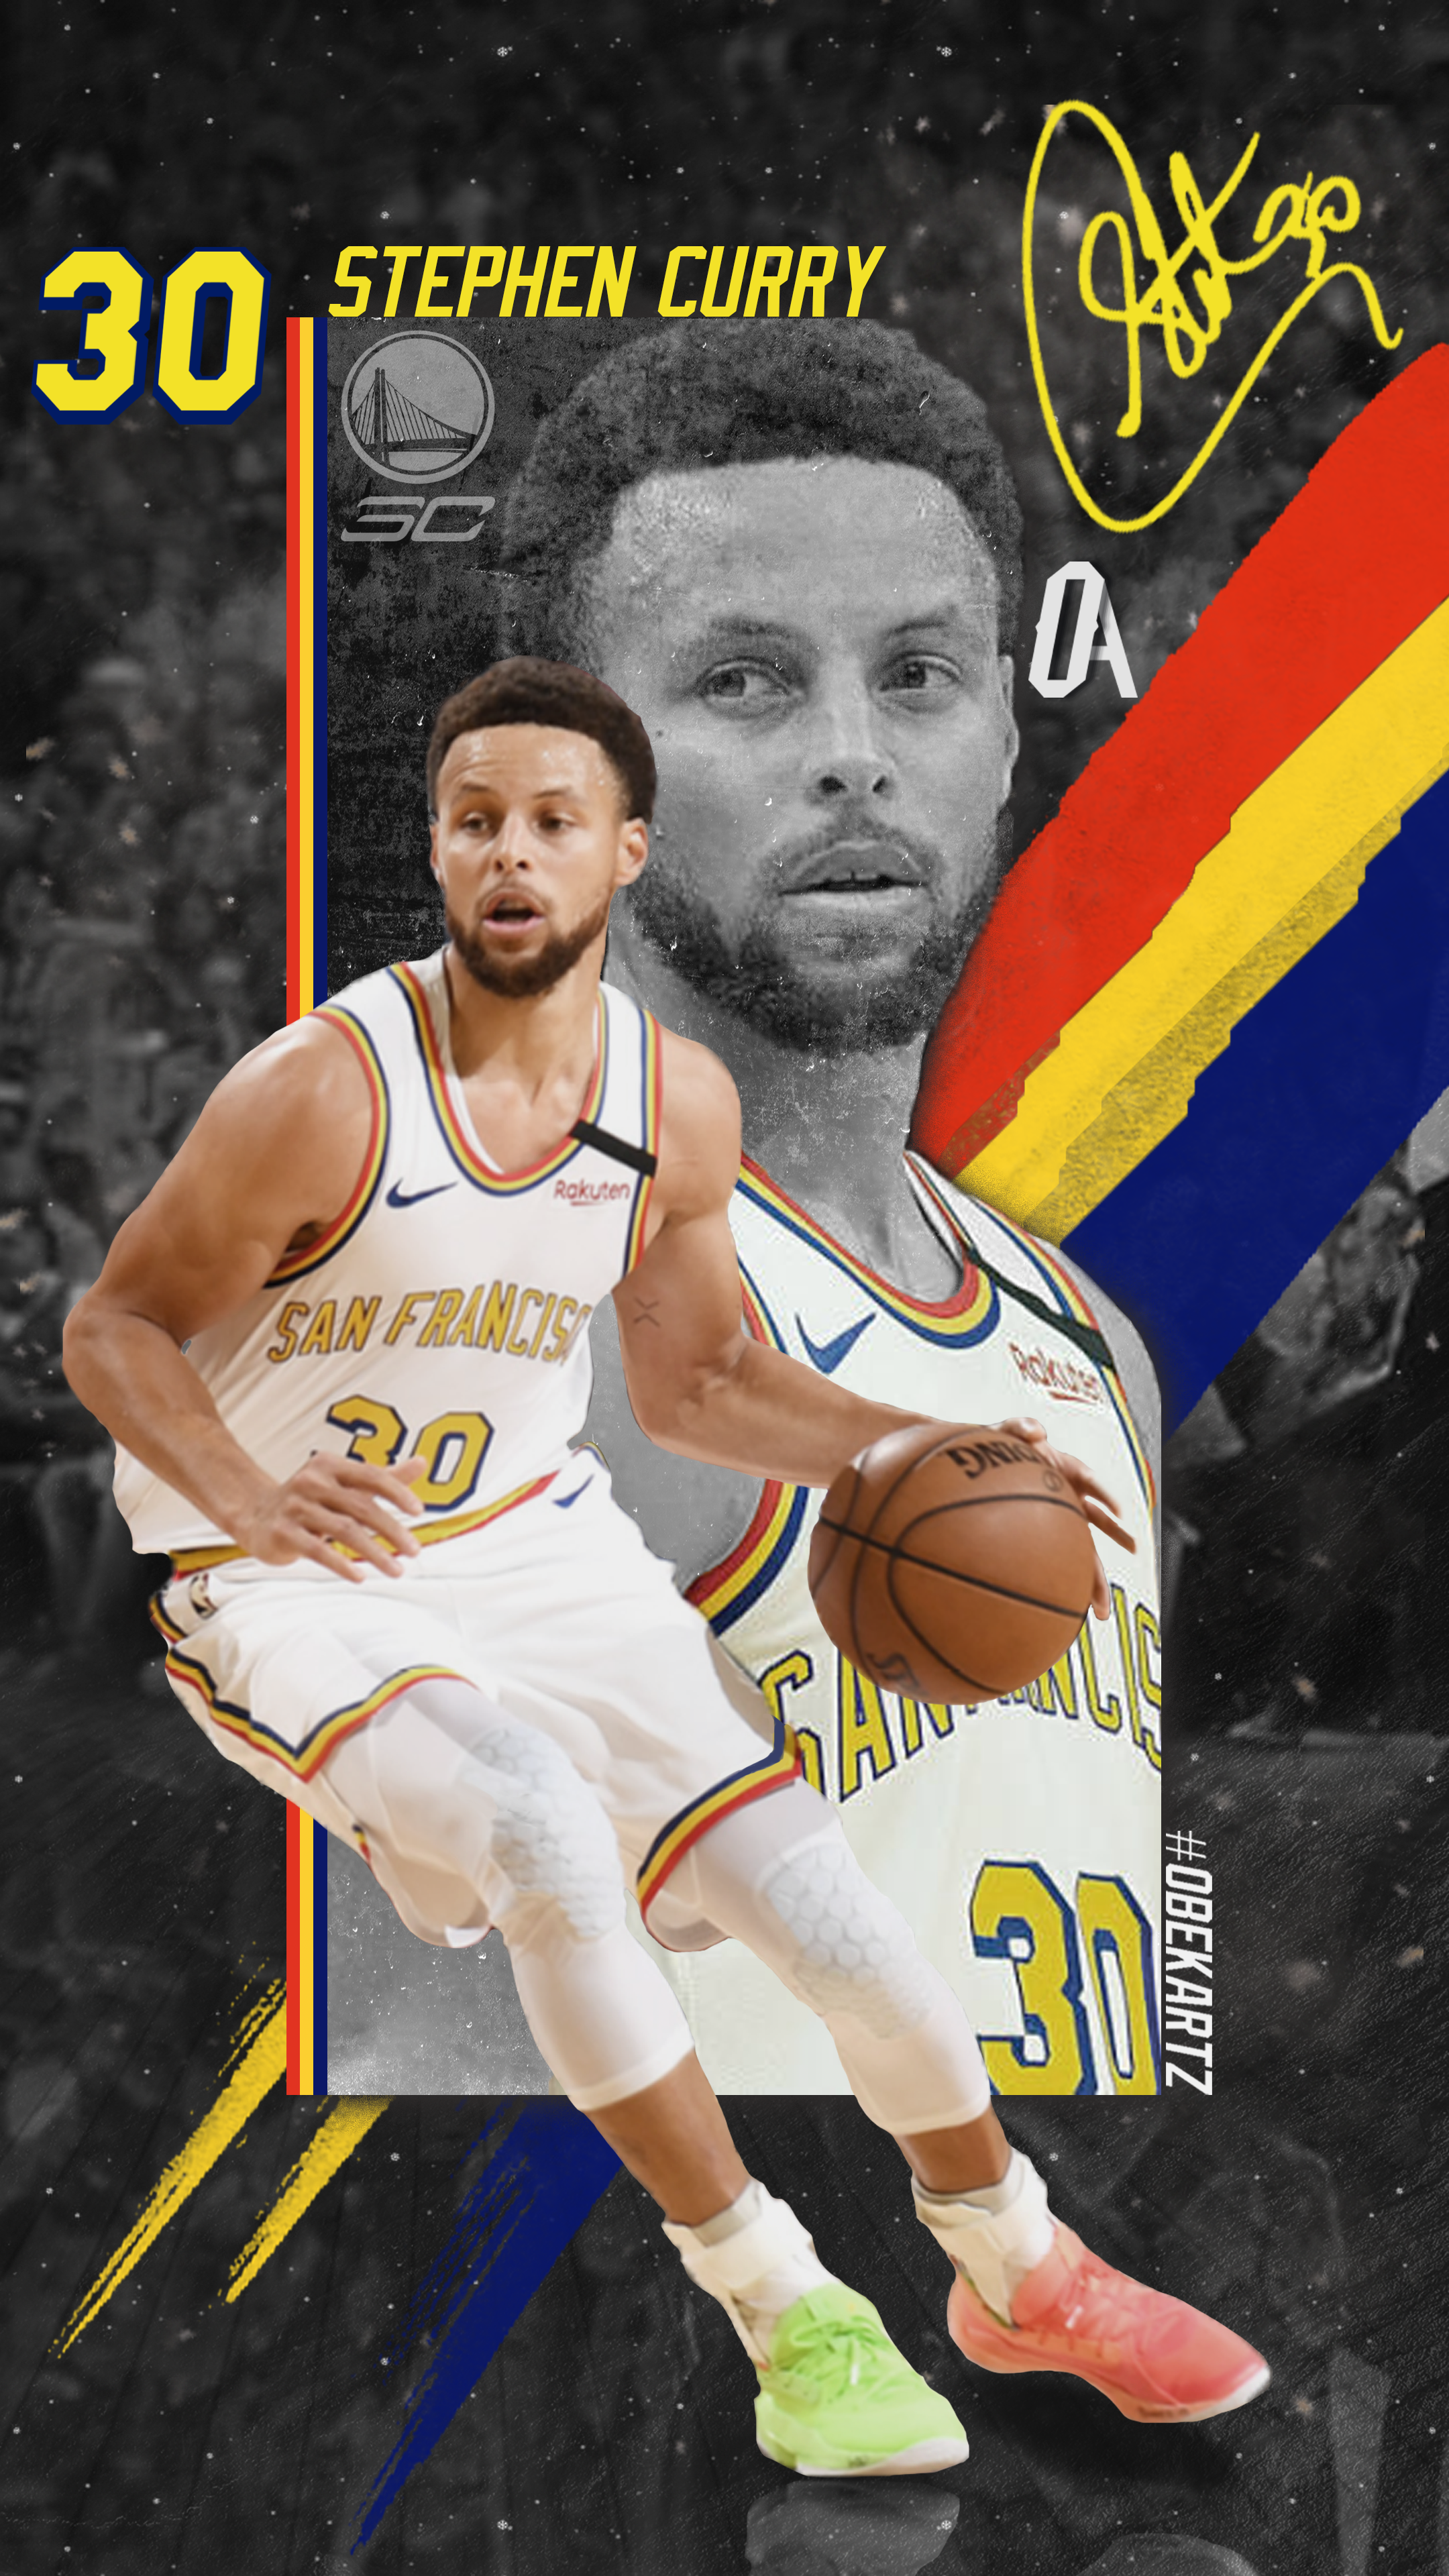 Stephen Curry wallpaper  Stephen curry basketball, Stephen curry wallpaper,  Curry wallpaper